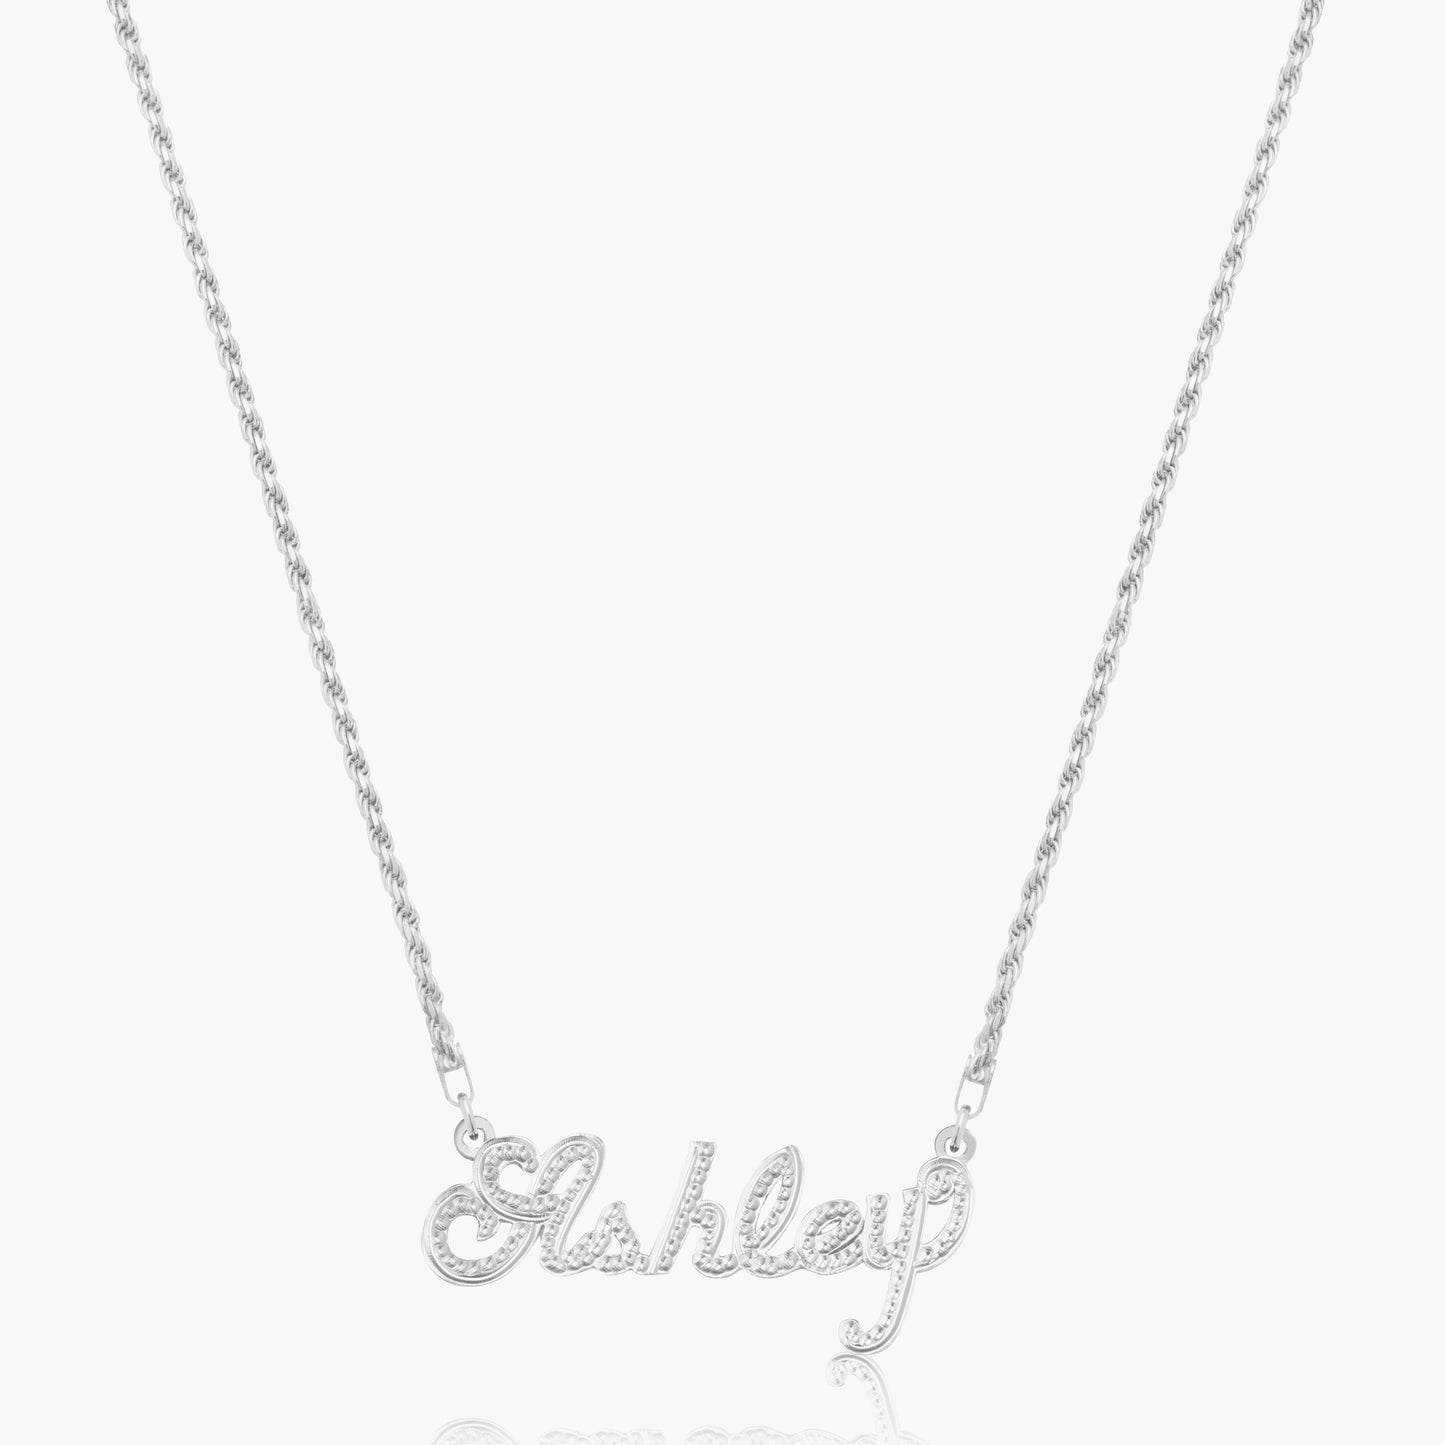 Kid's Frosted Script Name Necklace